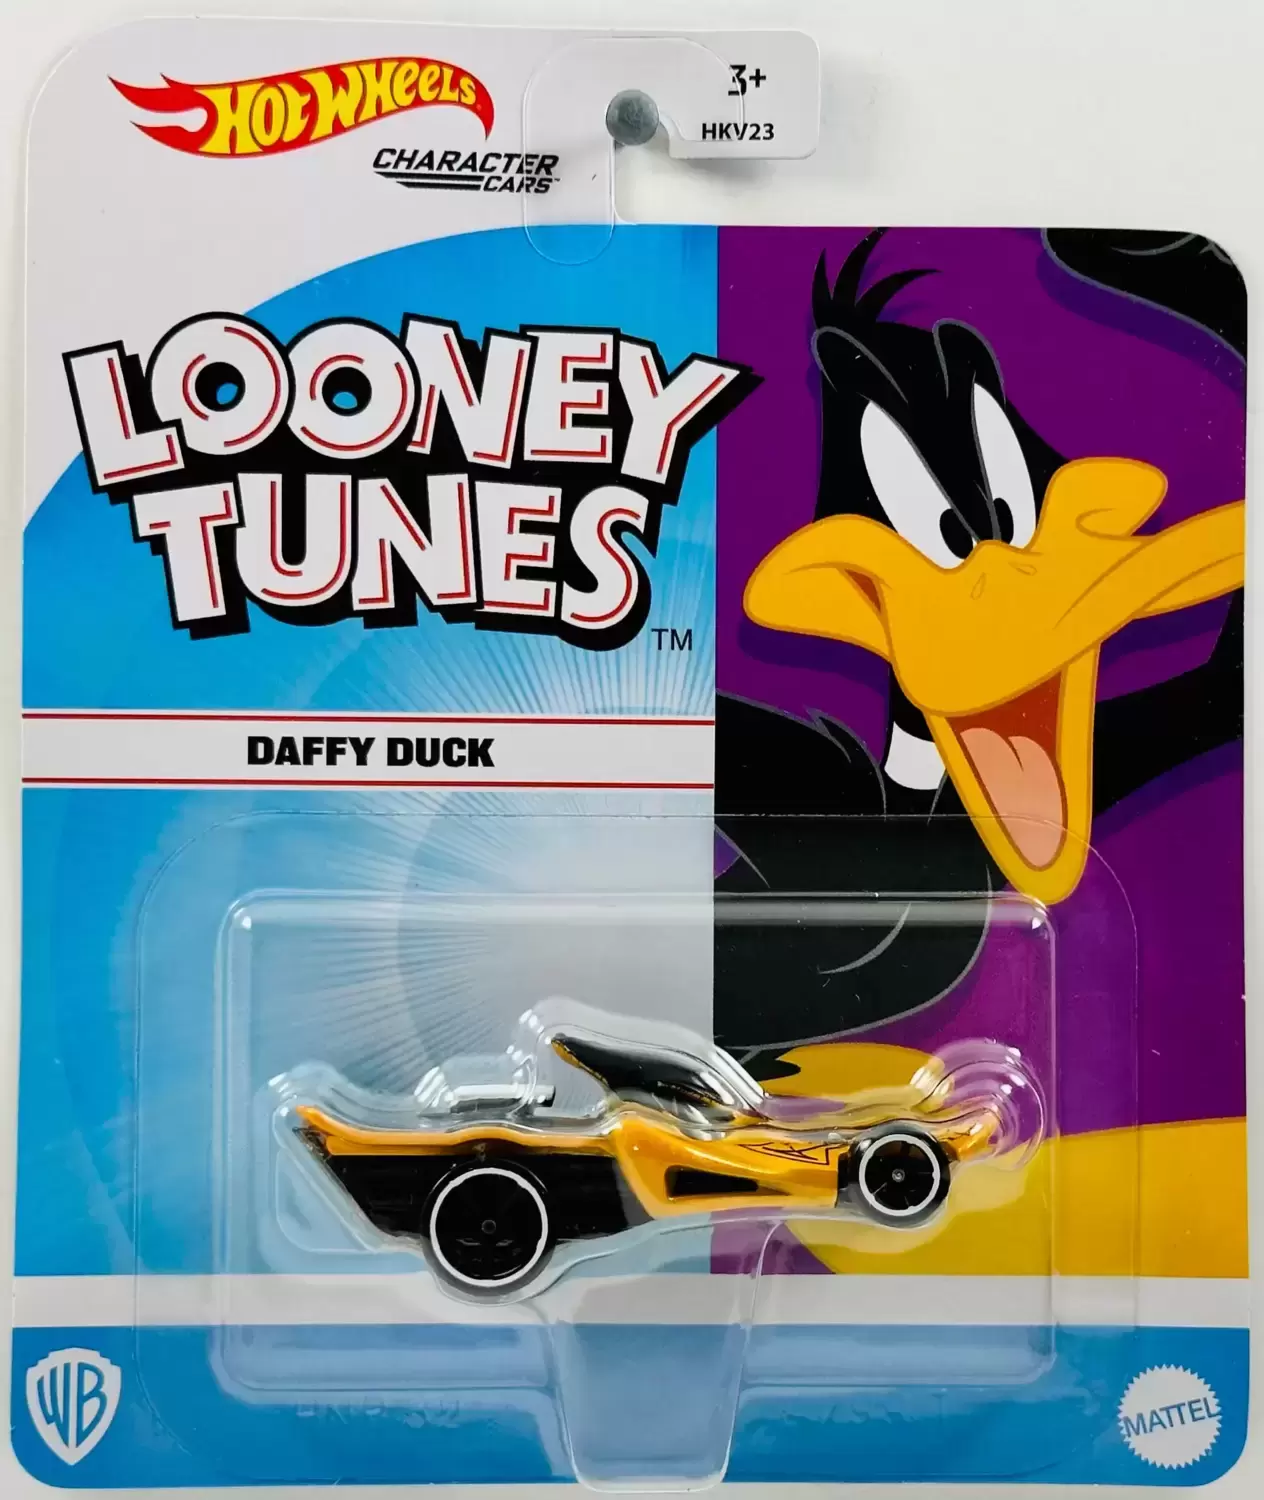 Looney Tunes Character Cars (2023) - HKV23 - Daffy Duck